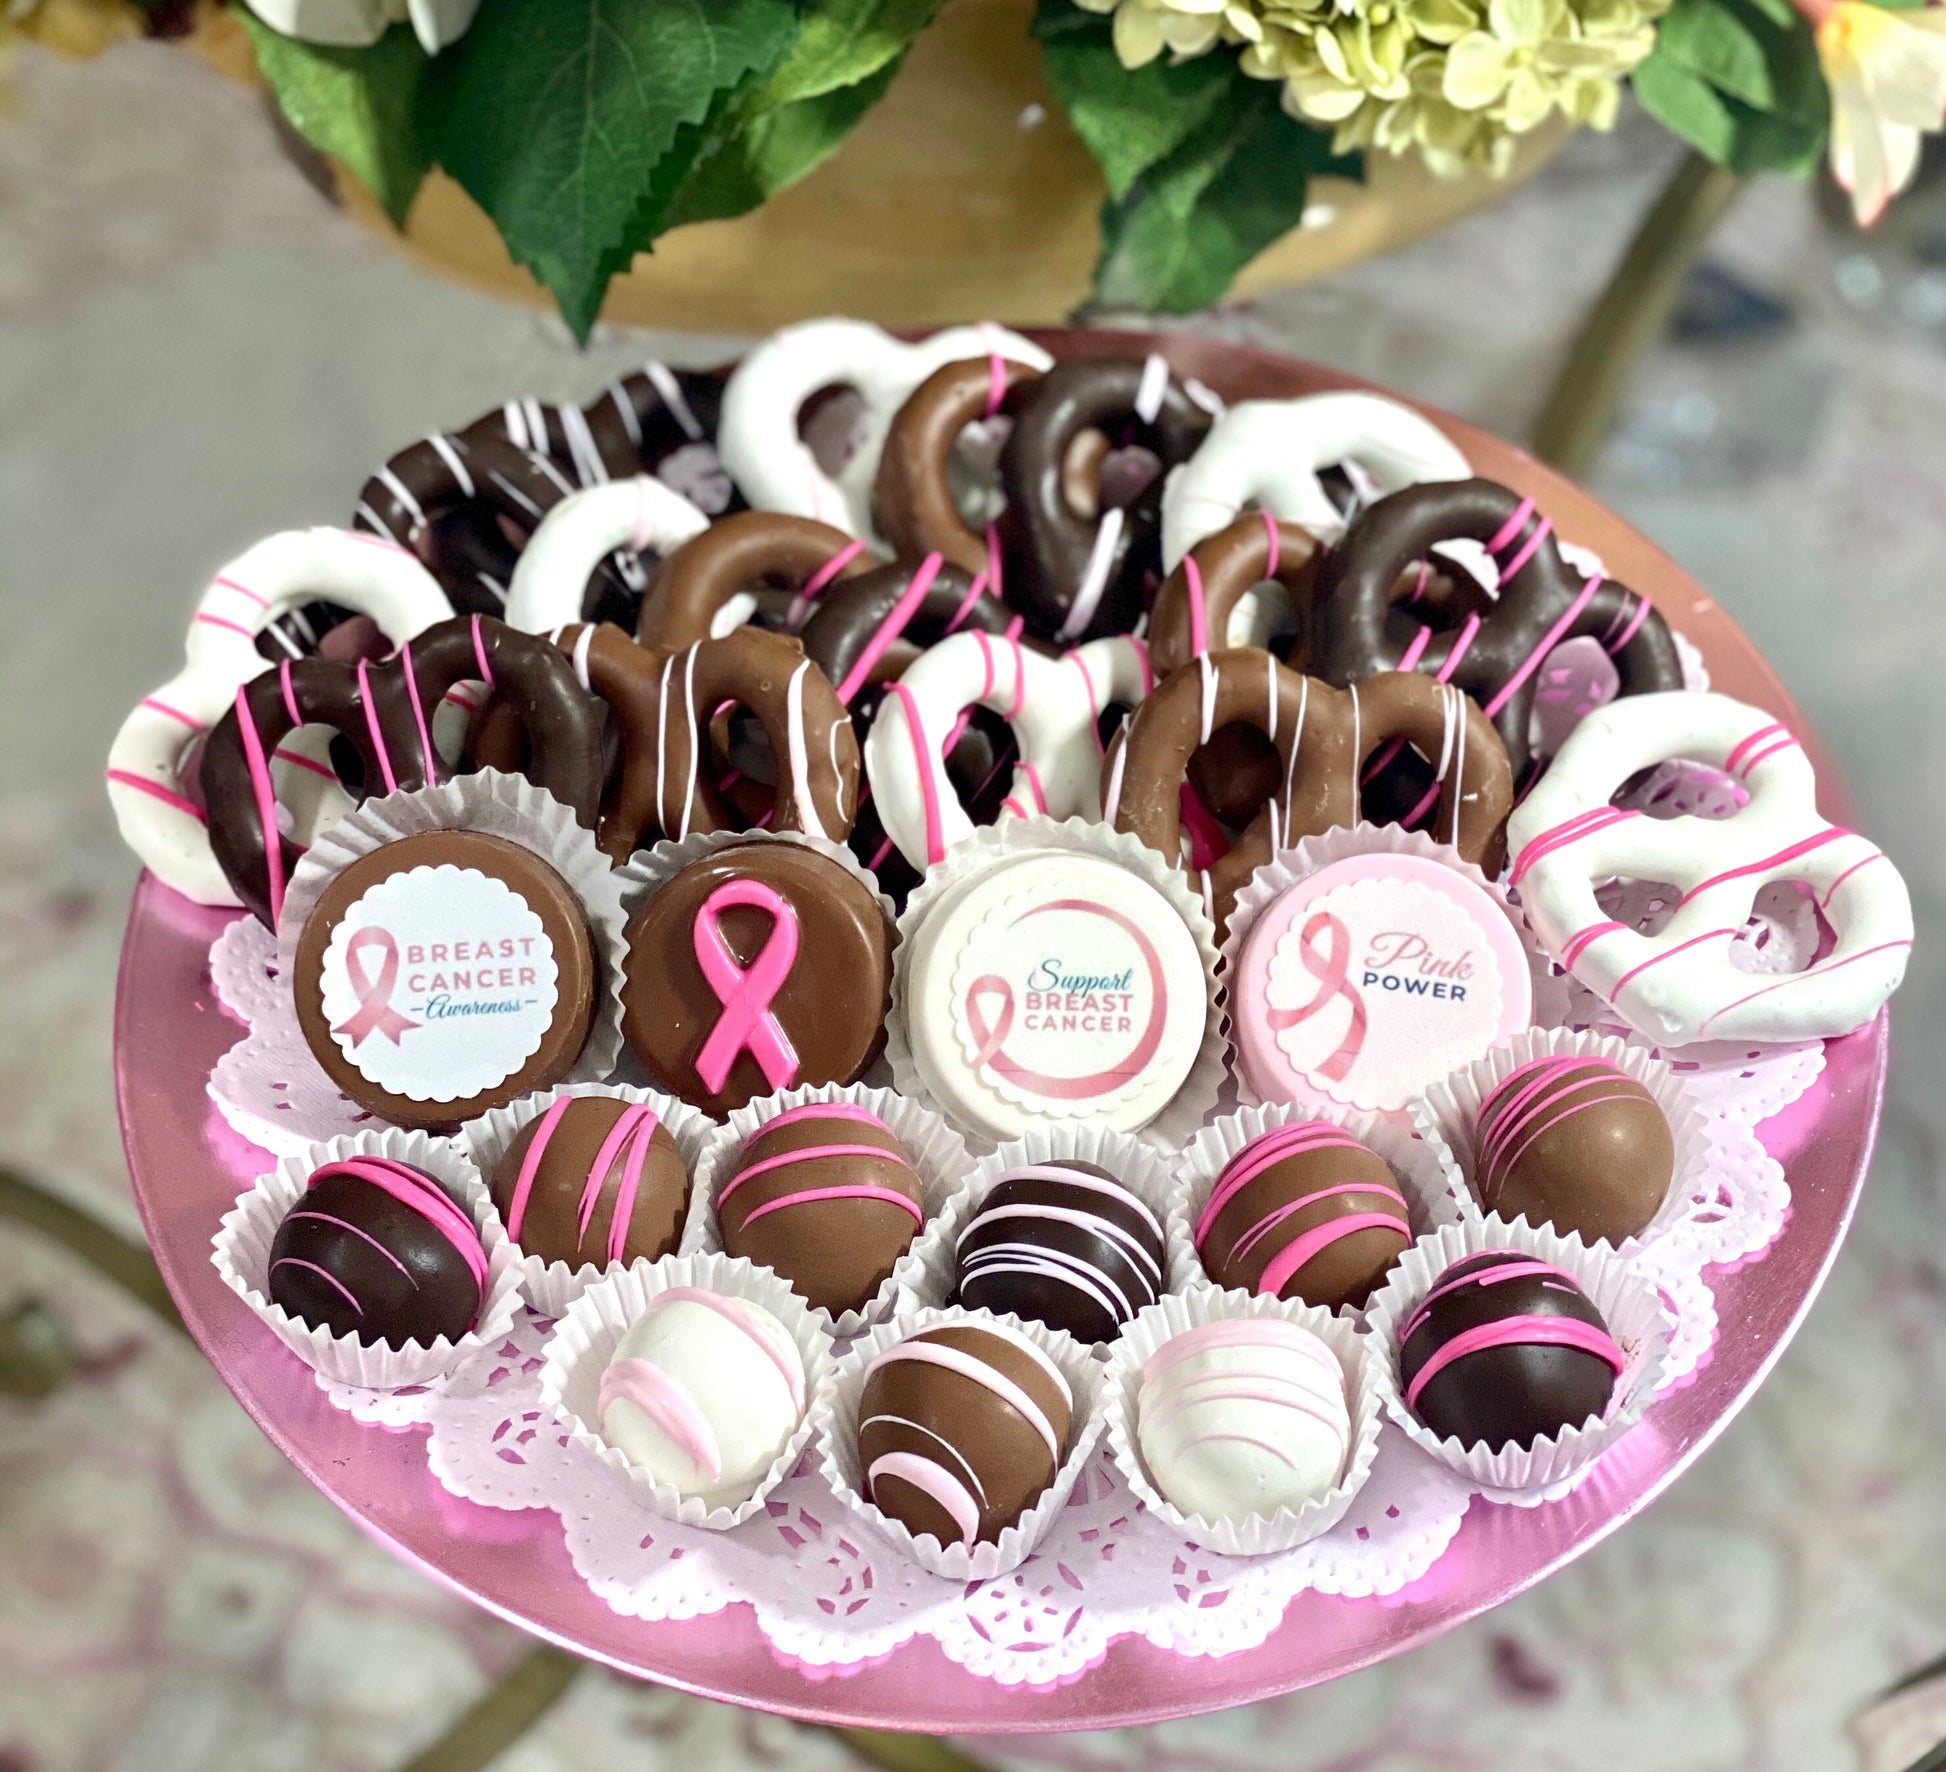 Large Mixed Chocolate Platter- Breast Cancer Awareness Fundraiser - The Dessert Ladies